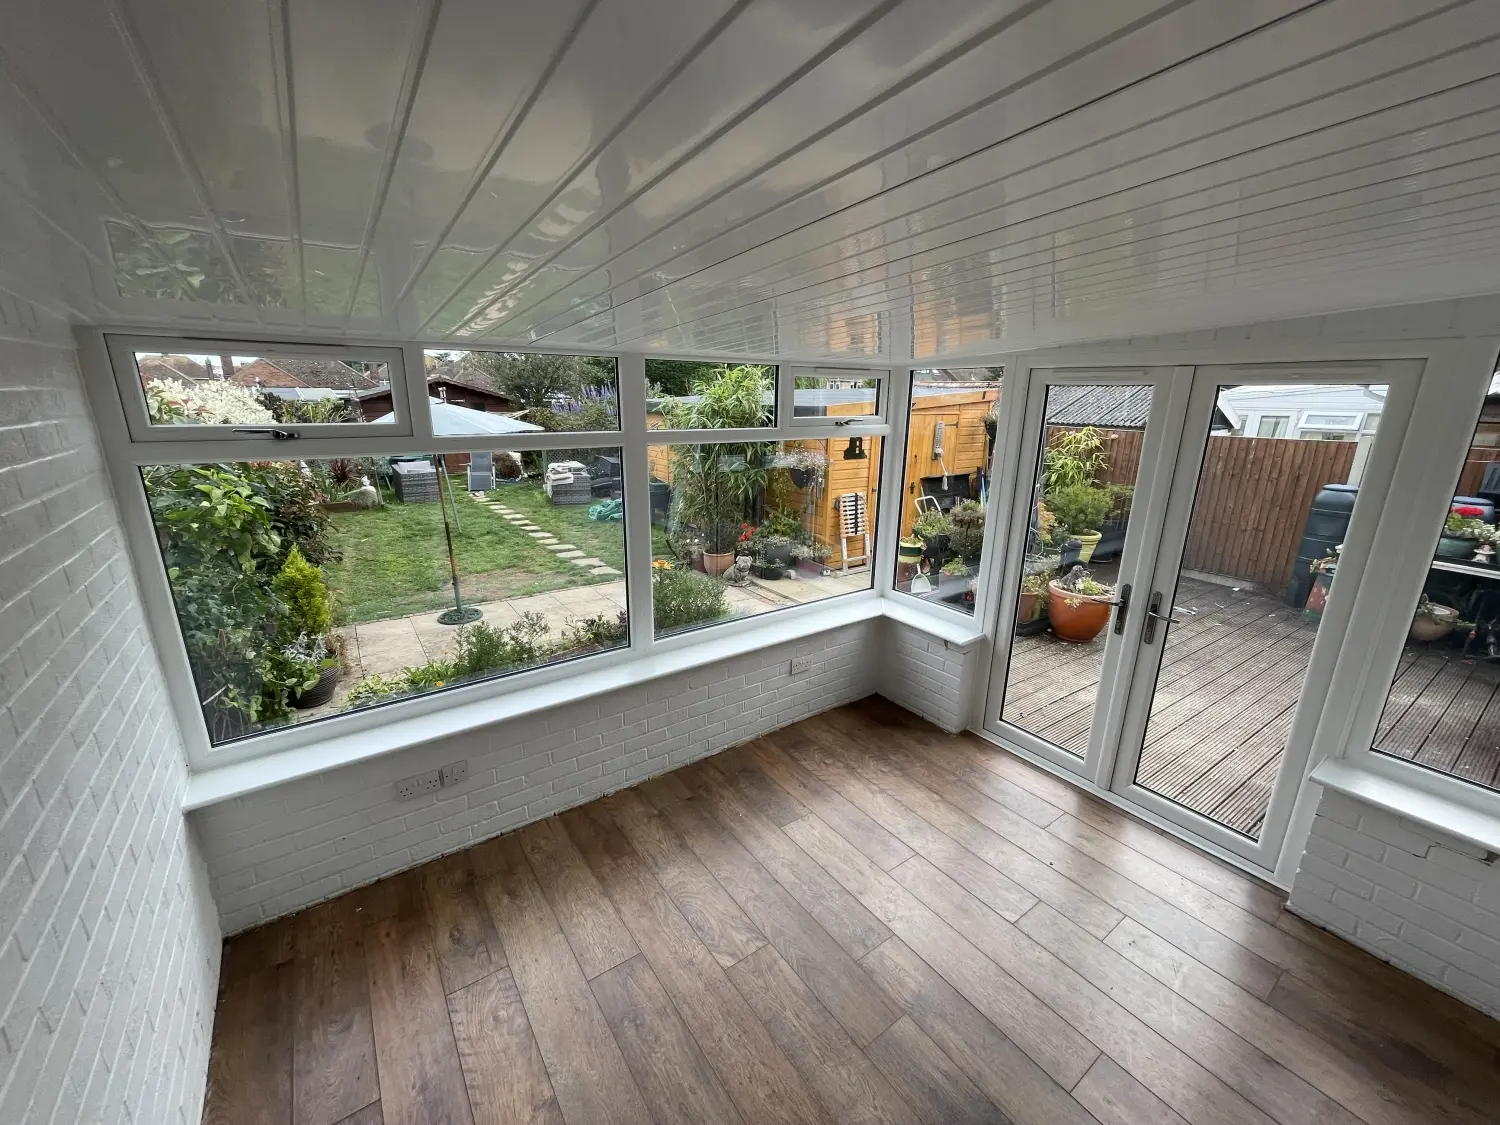 Year-Round Enjoyment: The Beauty of Insulated Conservatories